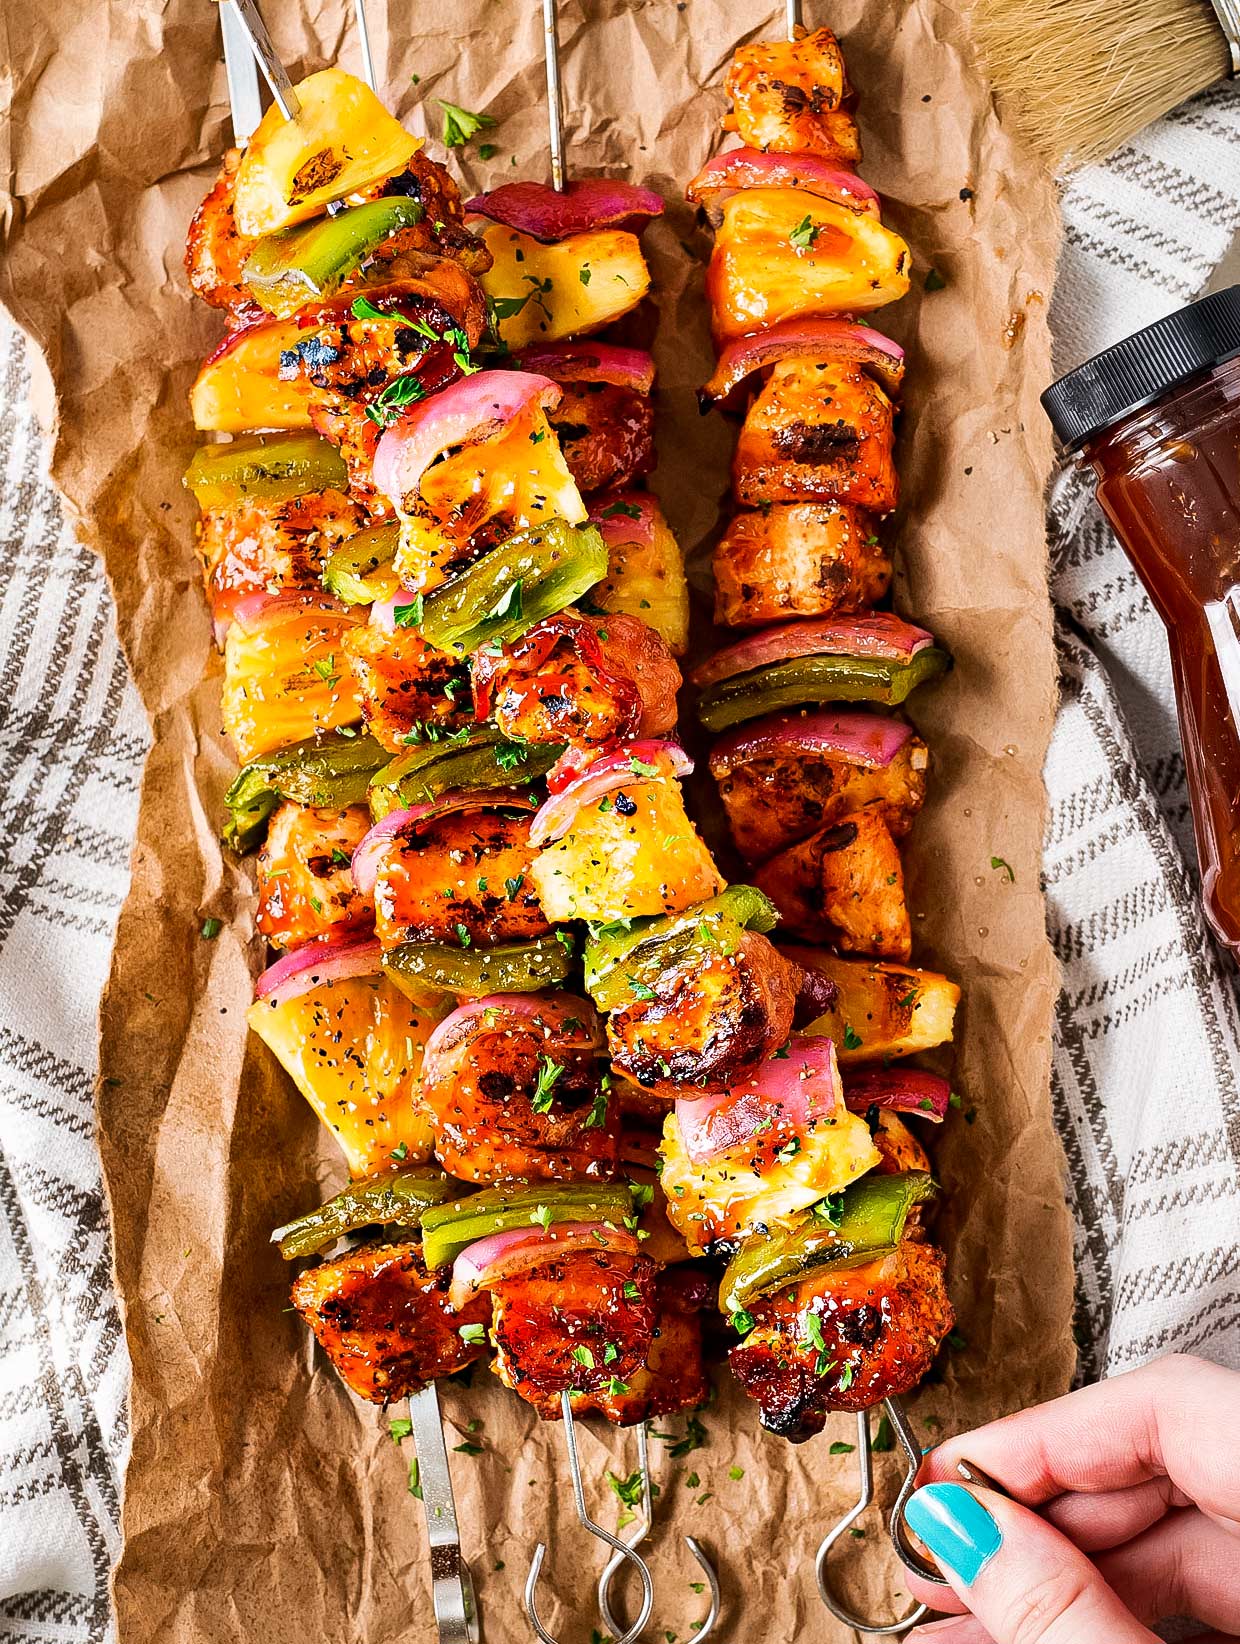 The 8 Best Skewers for Grilling